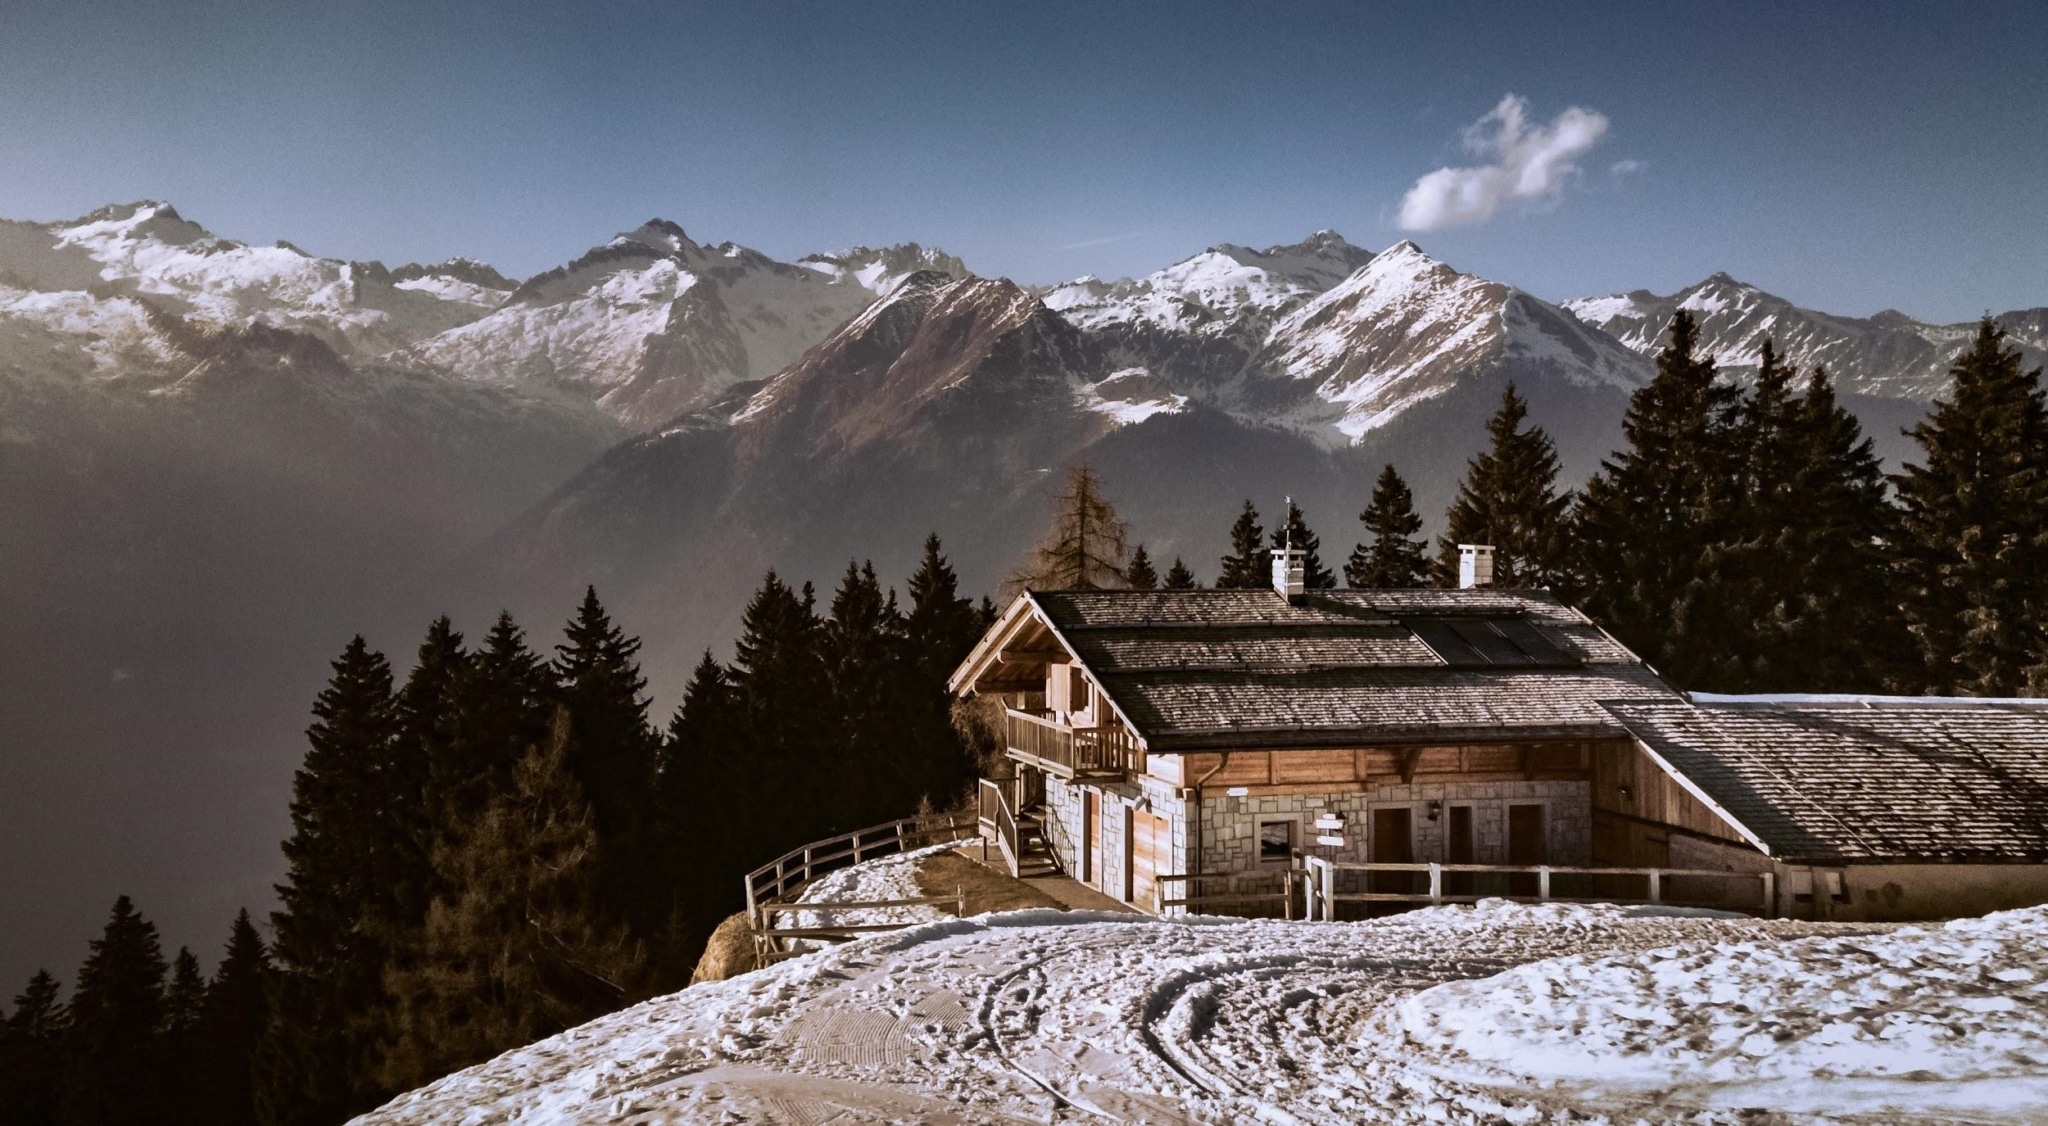 Switzerland: the magnificent panoramas of the Alps